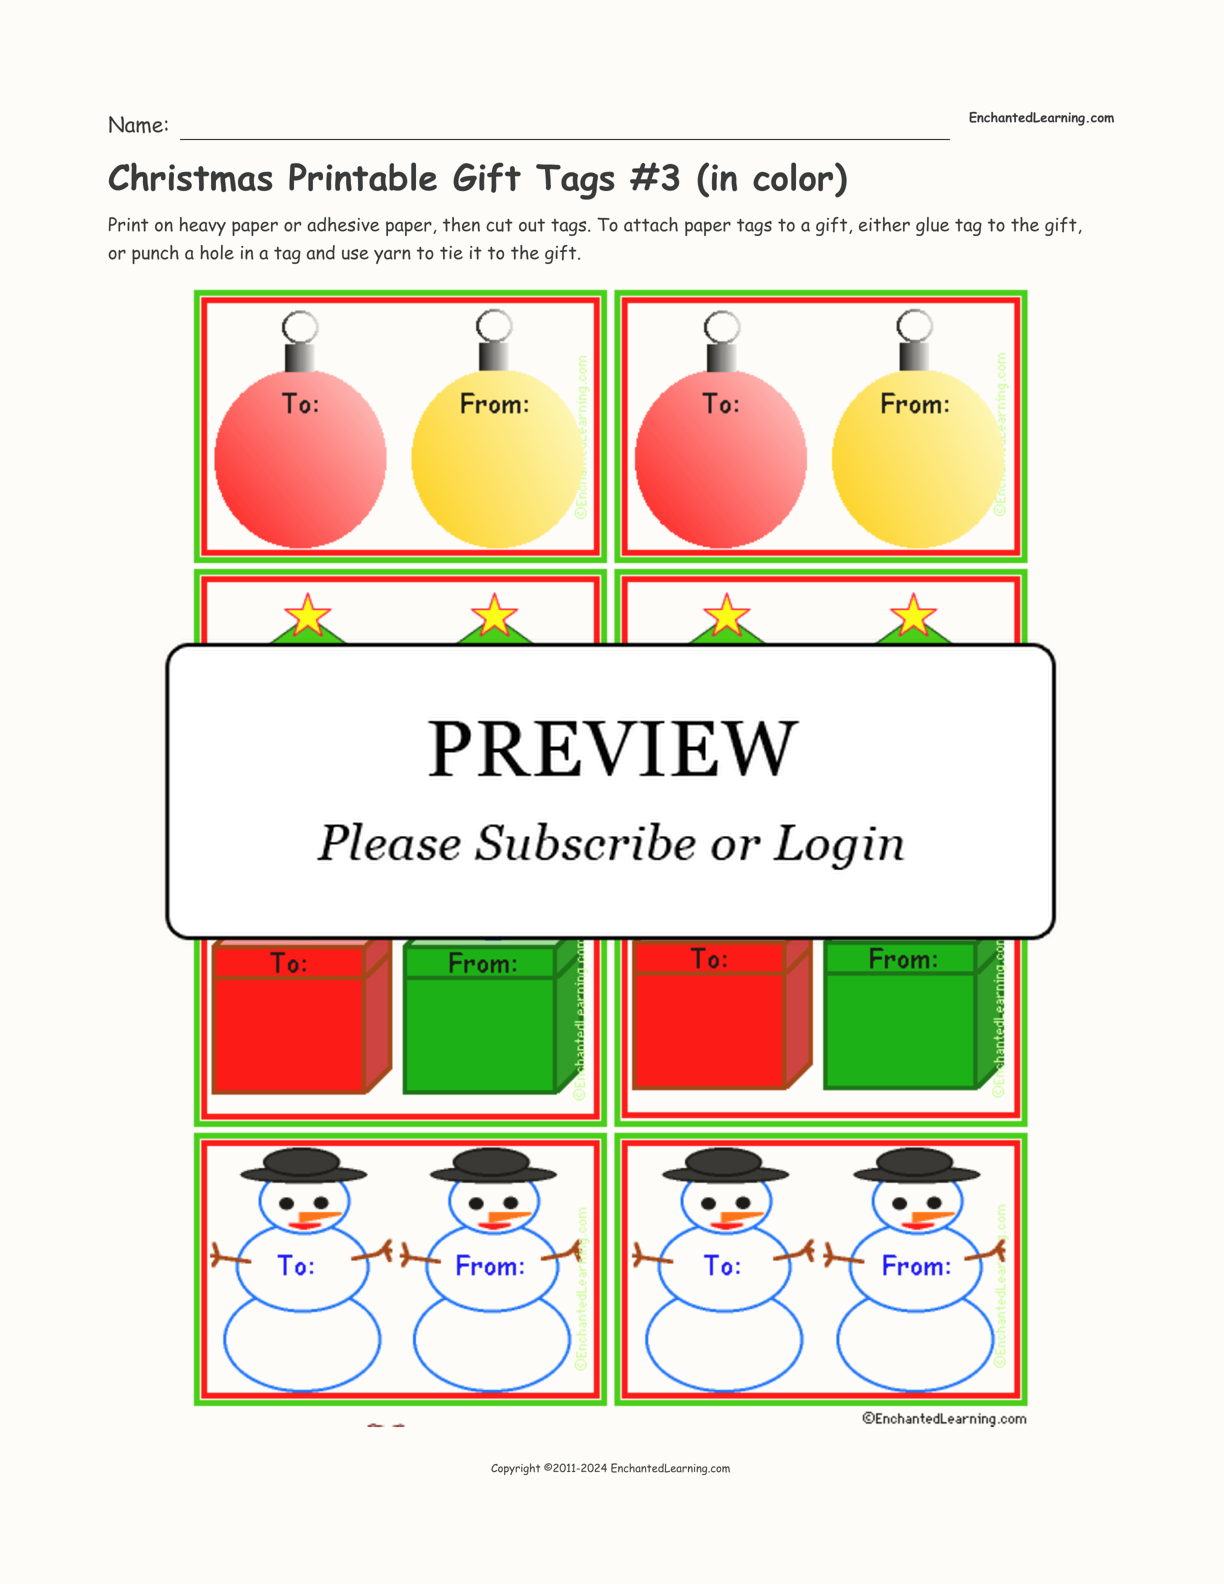 Christmas Printable Gift Tags #3 (in color) interactive printout page 1